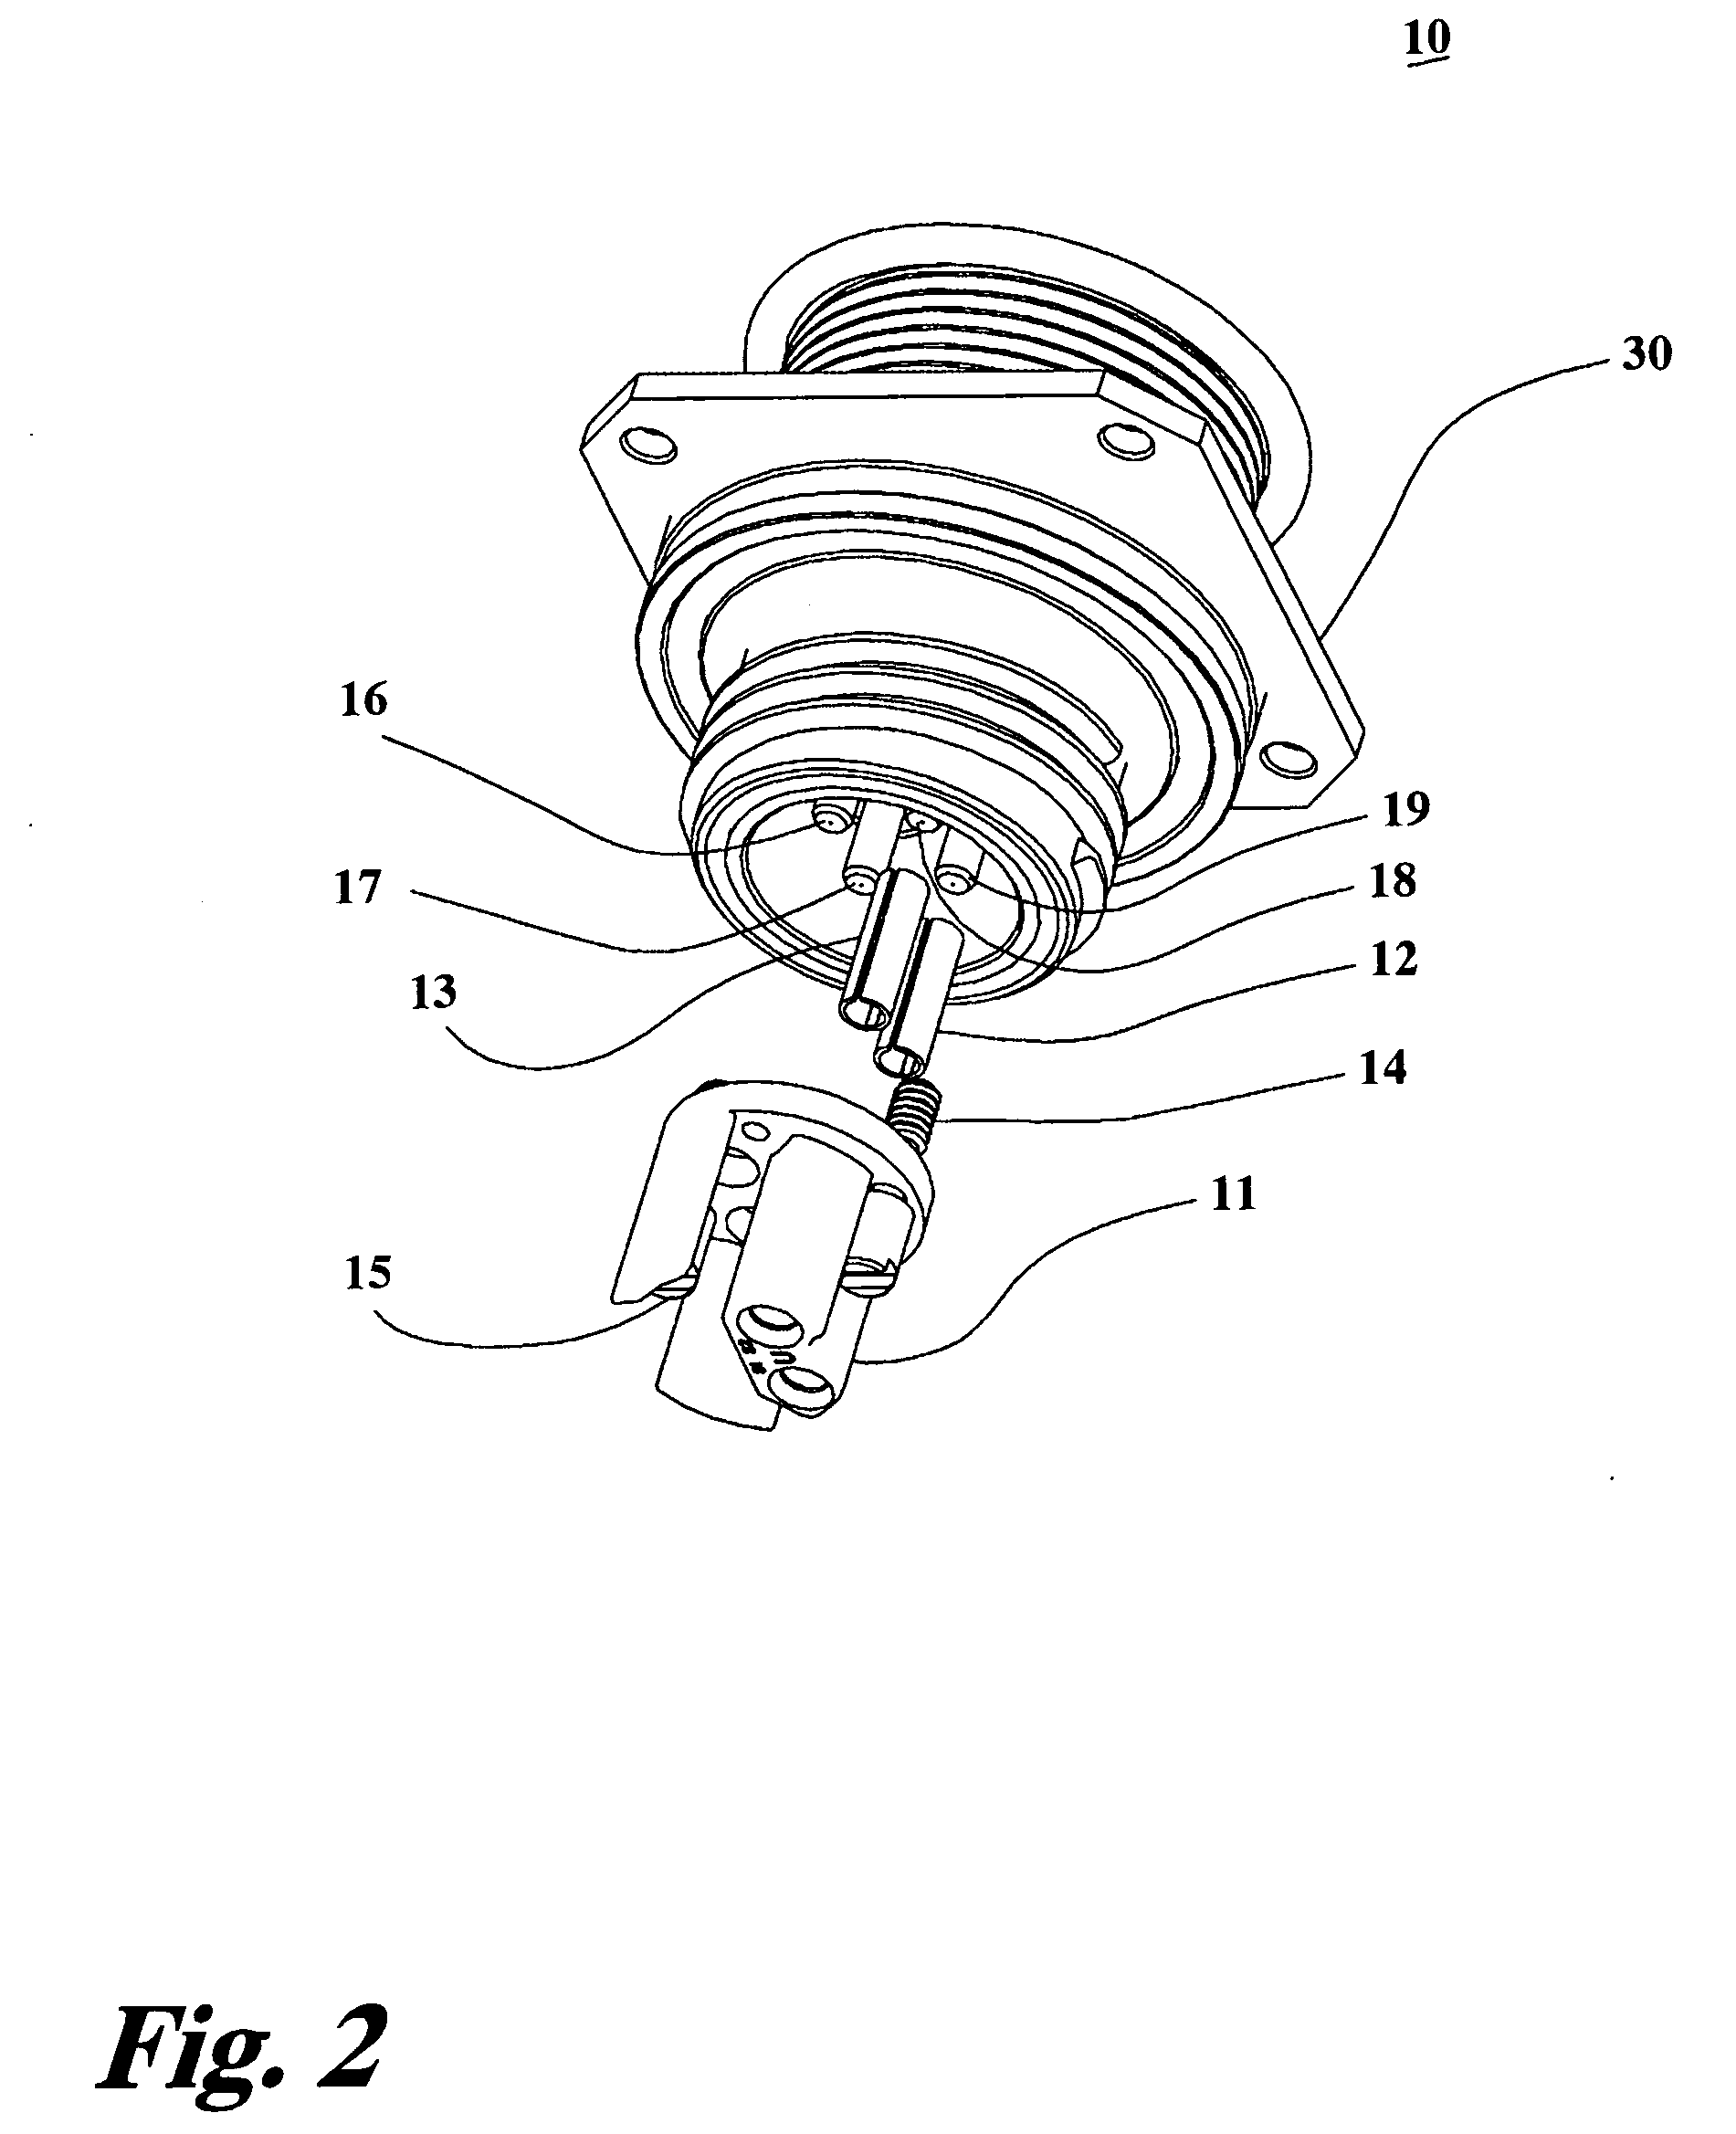 Expanded beam converter for mil-prf-83526/17 optical connector